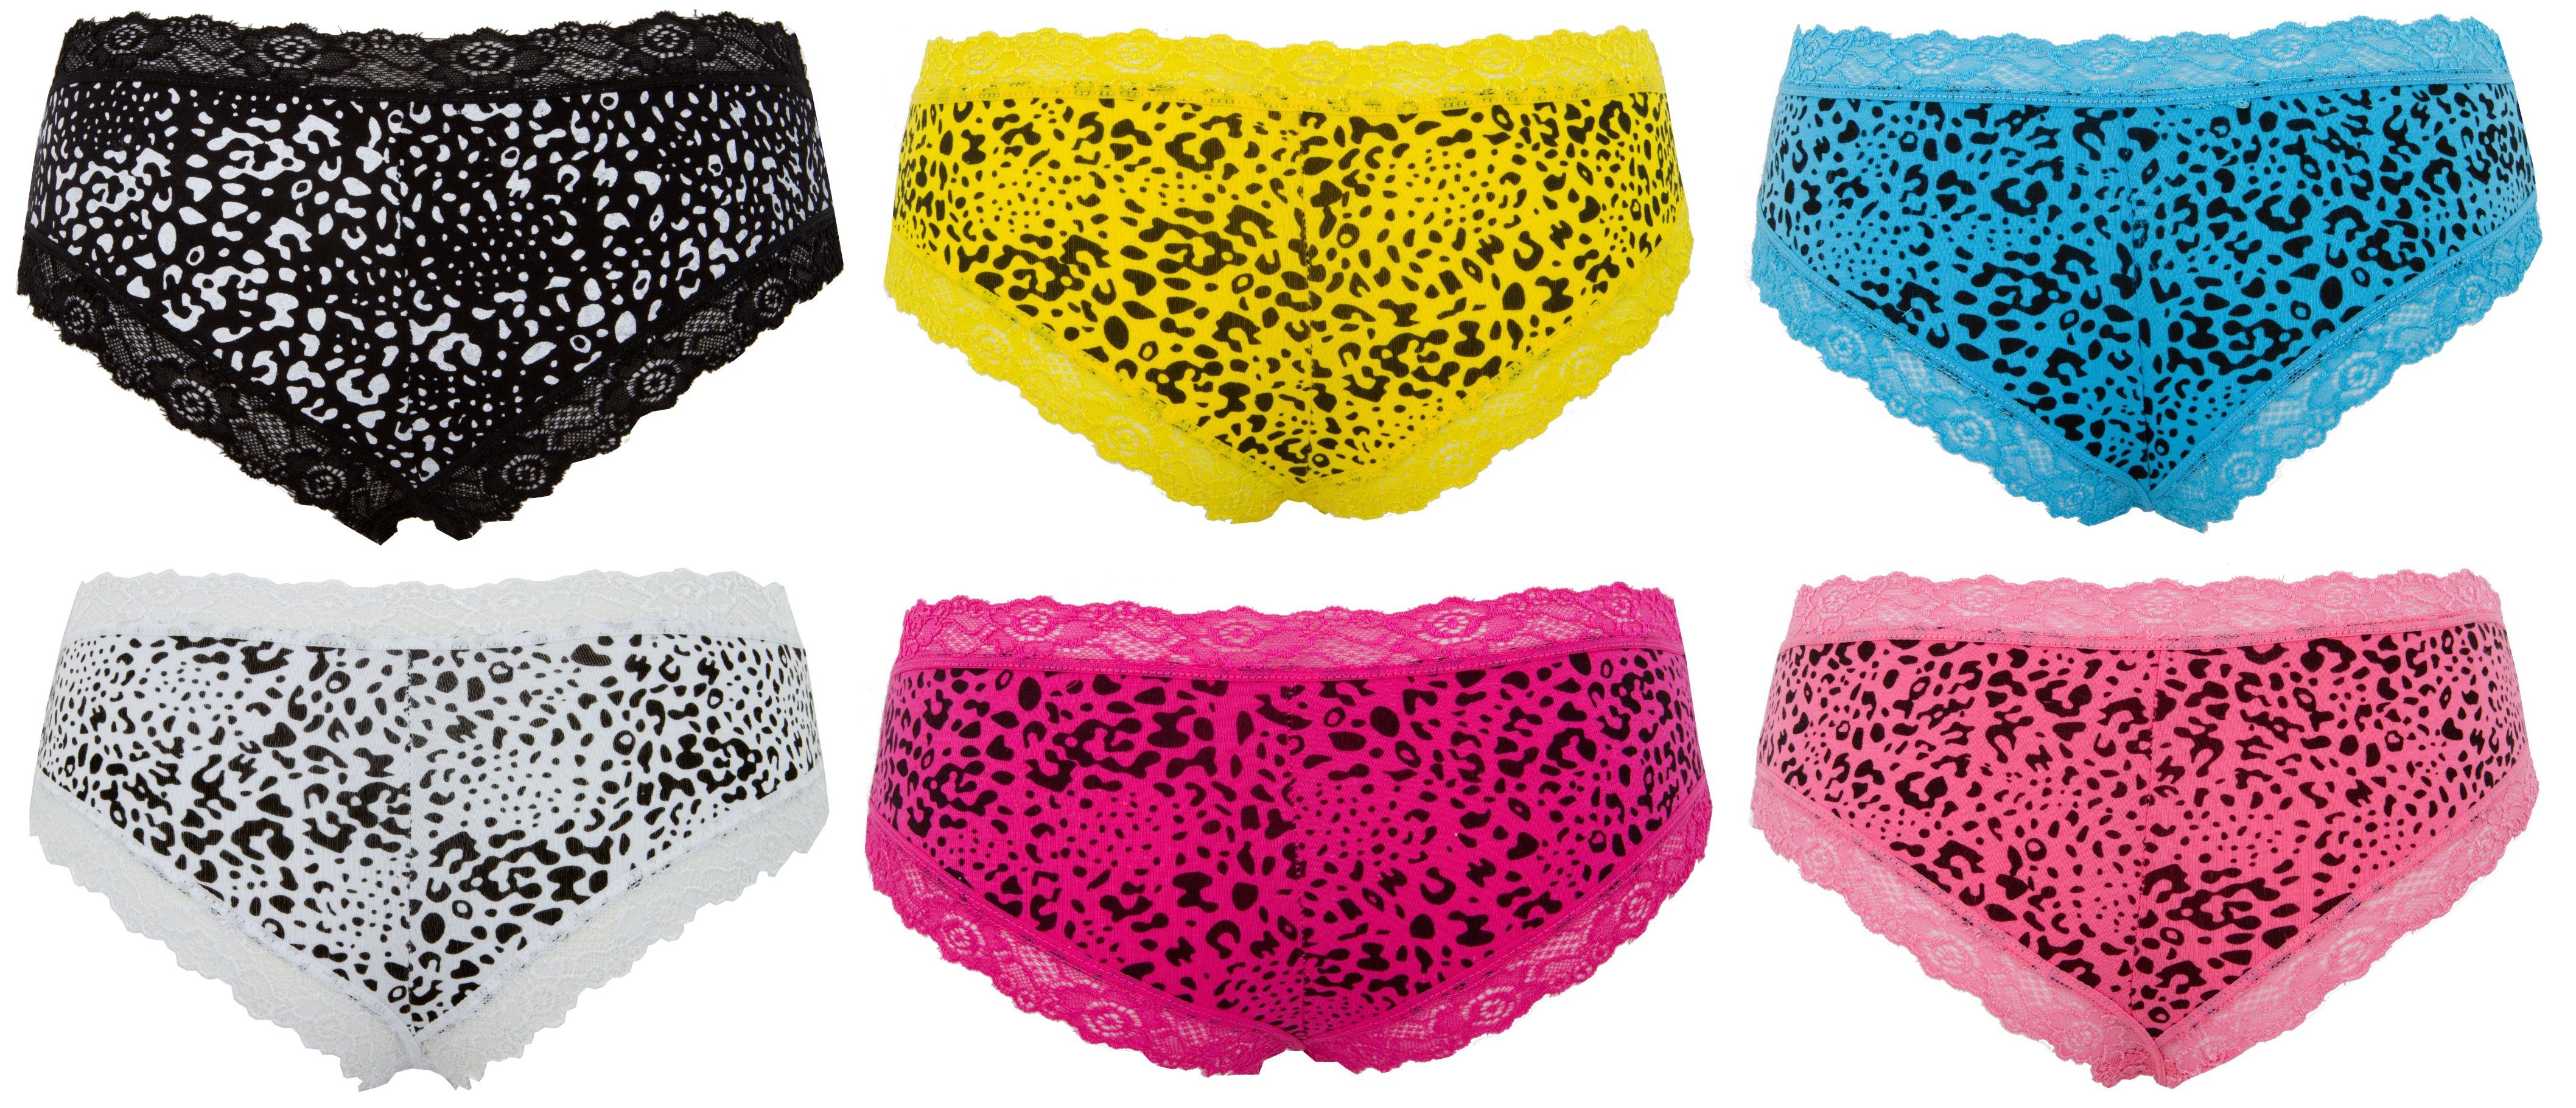 French Knickers Teen 86797 mit Pantys Panty (Spar-Set, Pack Damen Hotpants French Hipster AvaMia mit Pantys 86797 Hipster Knickers 6er 6er Hotpants Pack Damen Uni Uni Spitze Teen 6er-Pack) Spitze